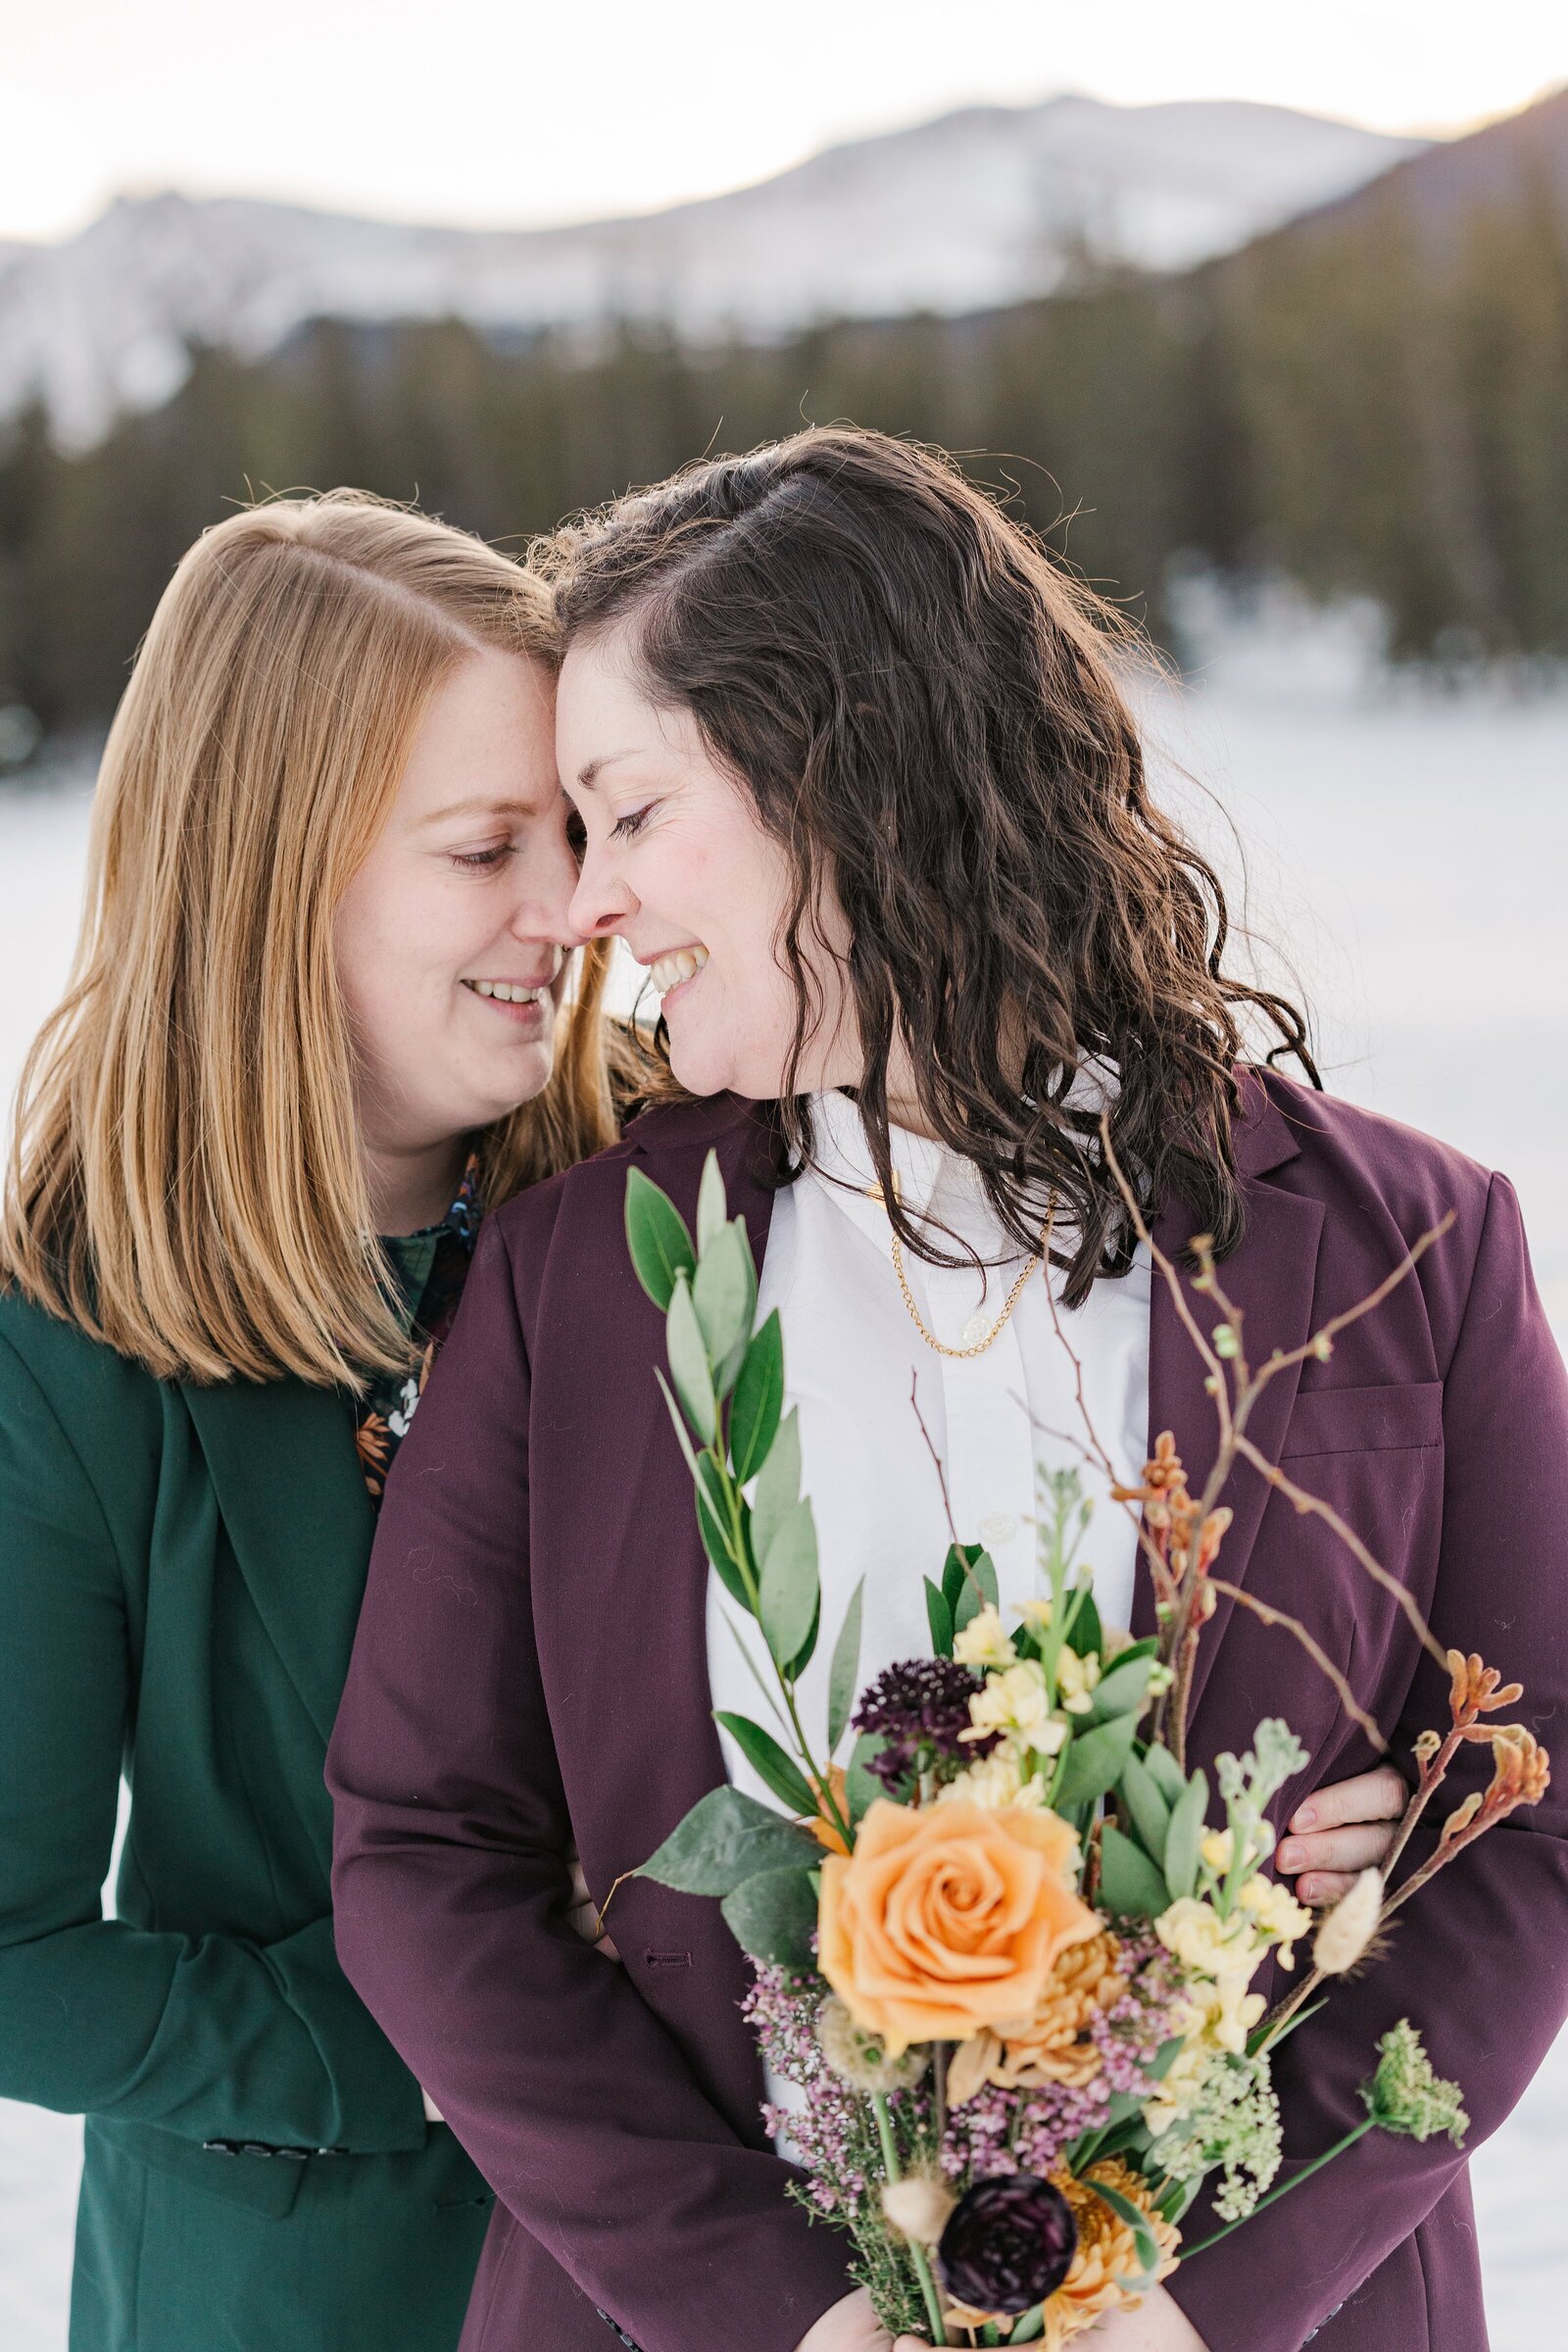 Samantha Immer Photography provides professional and experienced mountain wedding photography in Colorado. Let us tell your love story with authentic storytelling and stunning natural light.